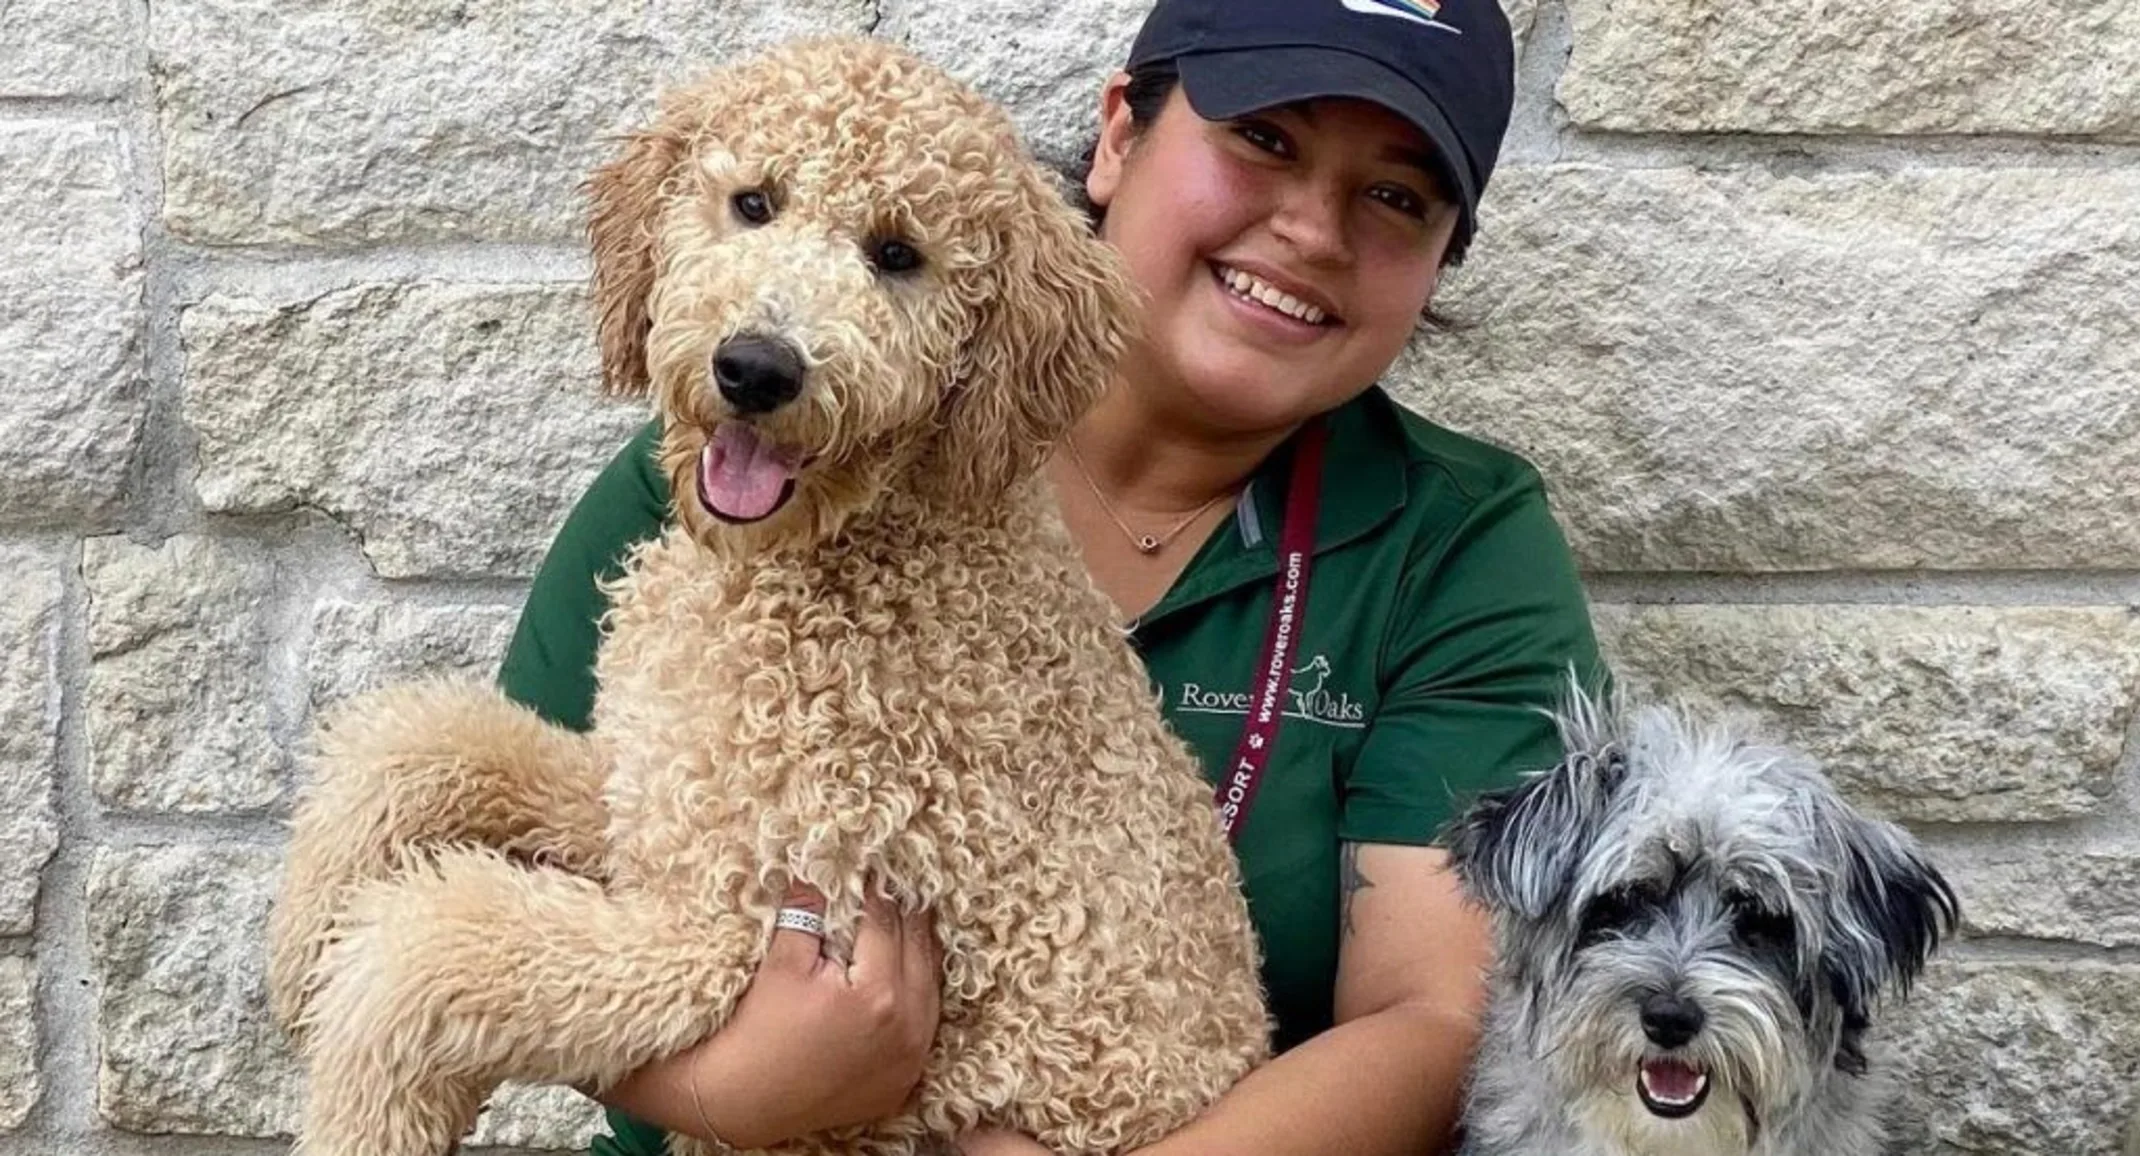 A woman holds a dog while another dog is next to her smiling in the photo